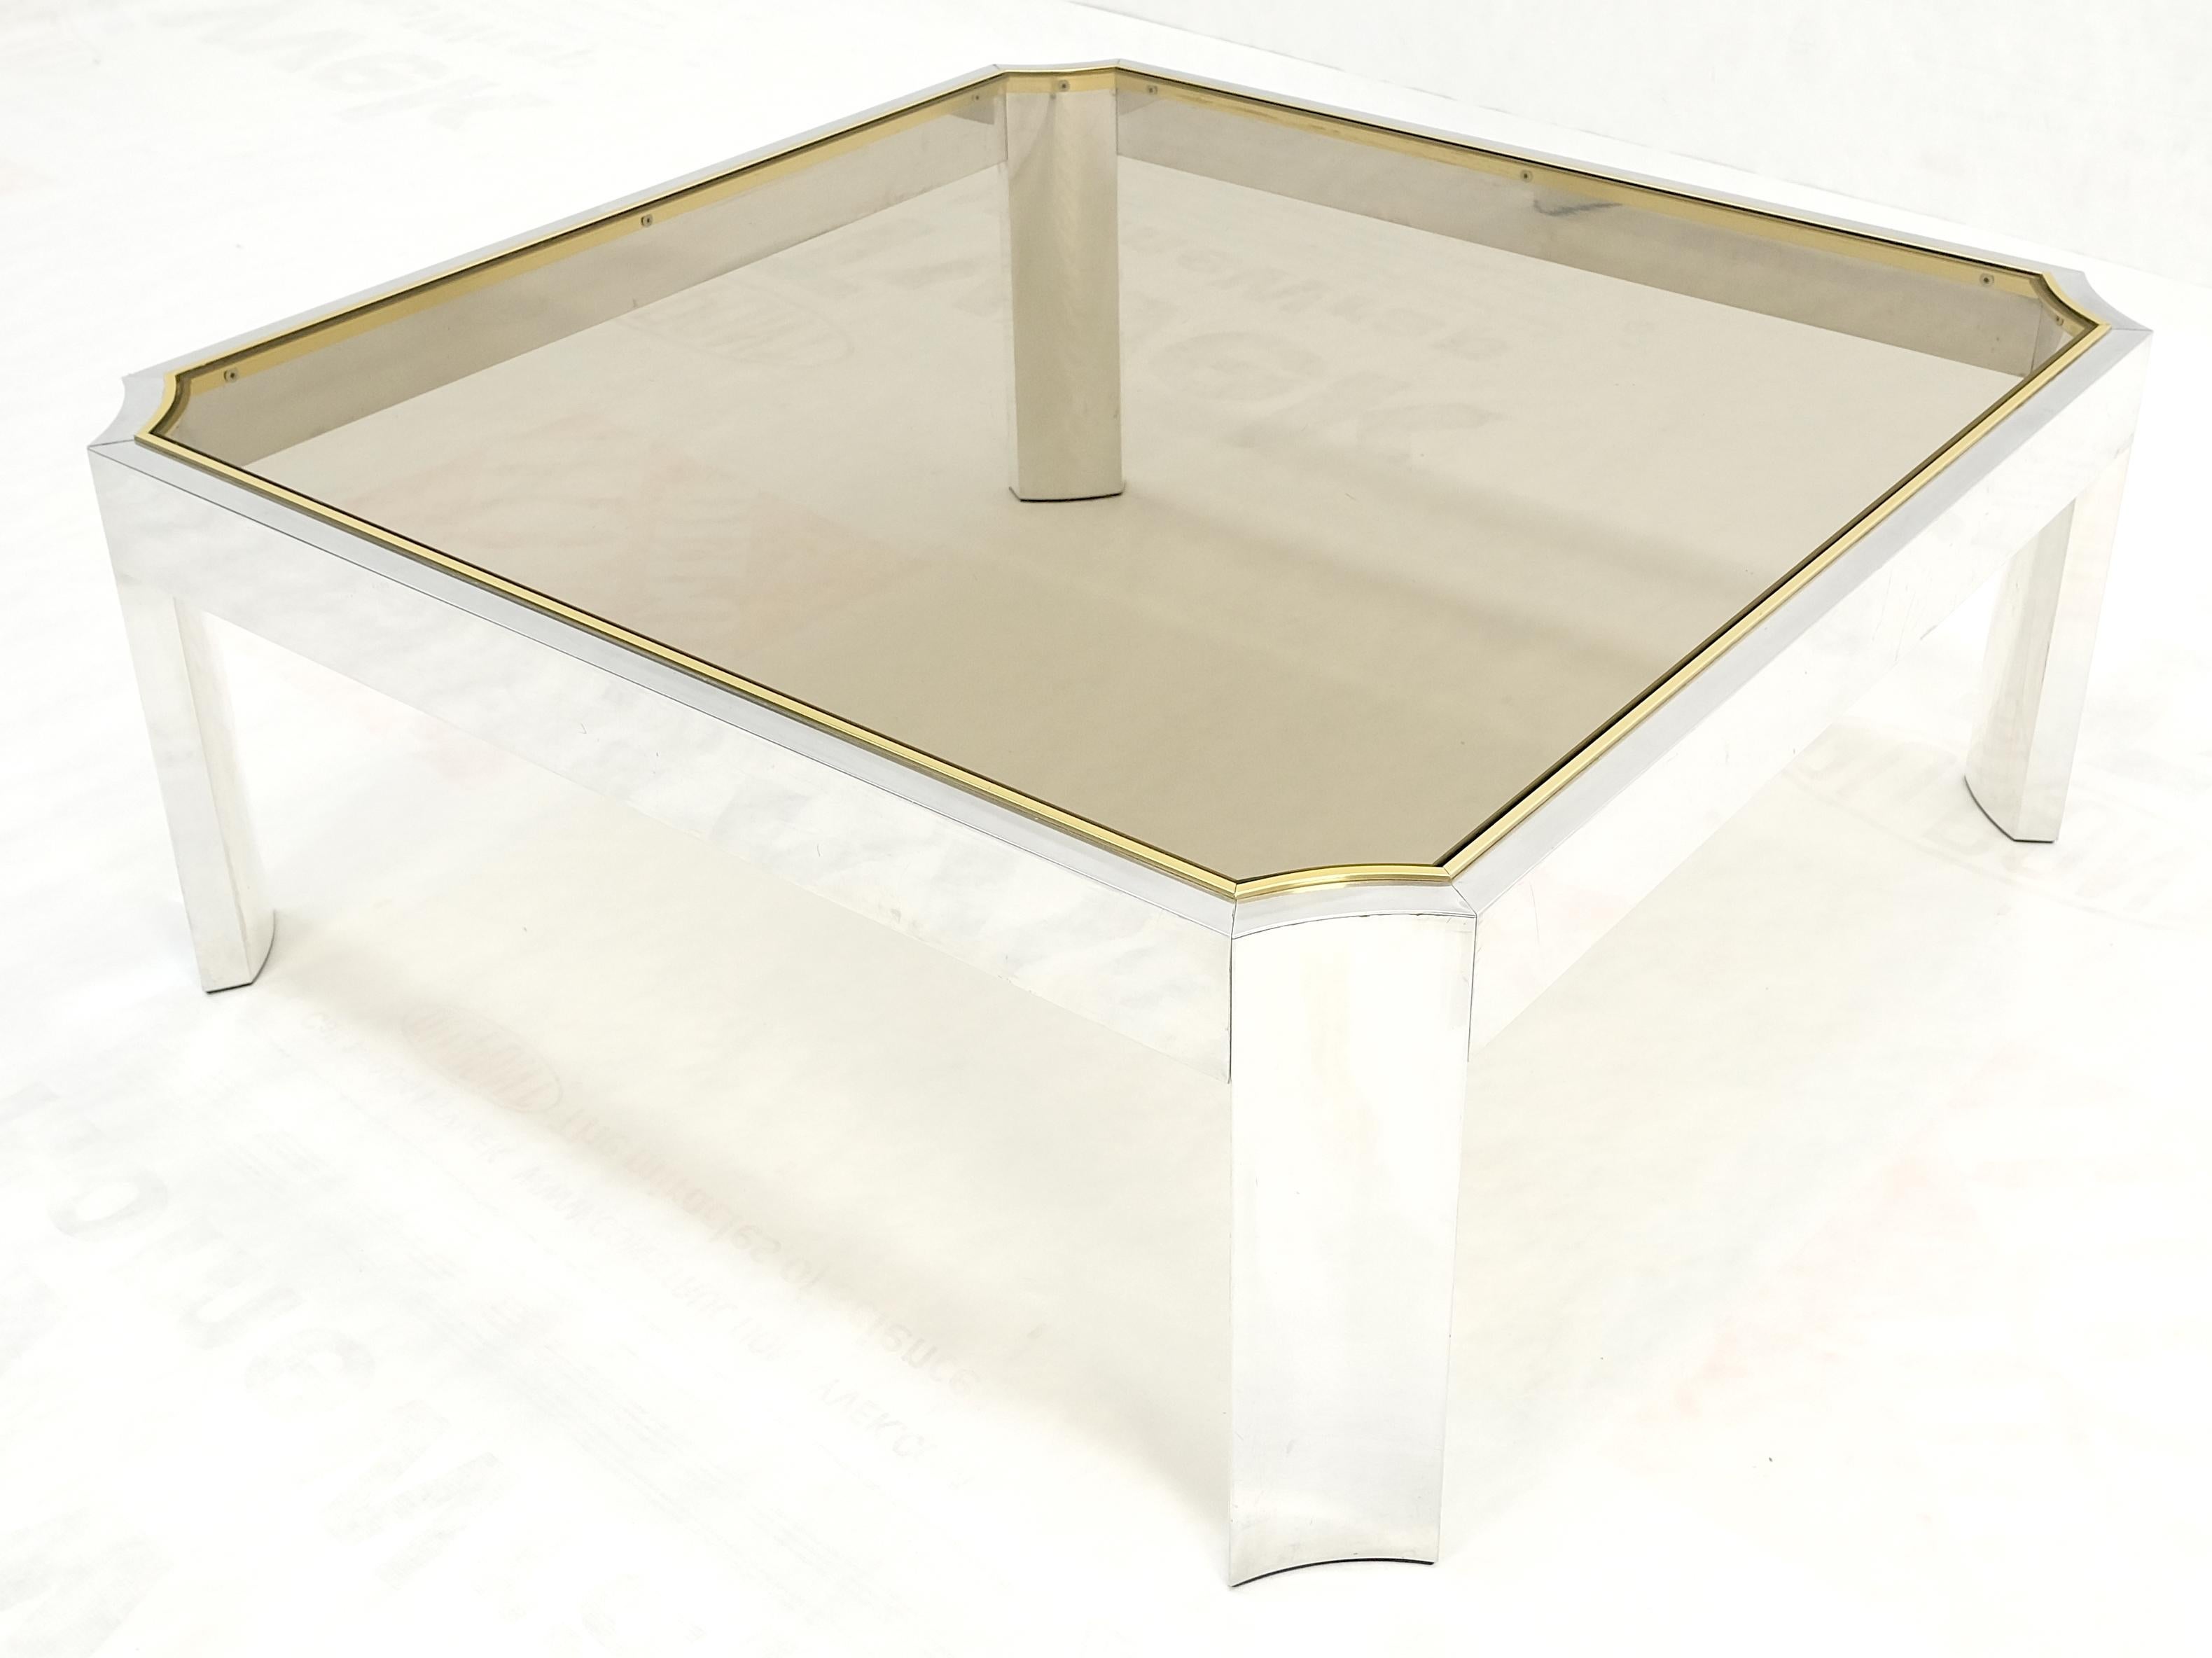 Polished Aluminum Profile Brass Basel Smoked Glass Top Square Coffee Table MINT!